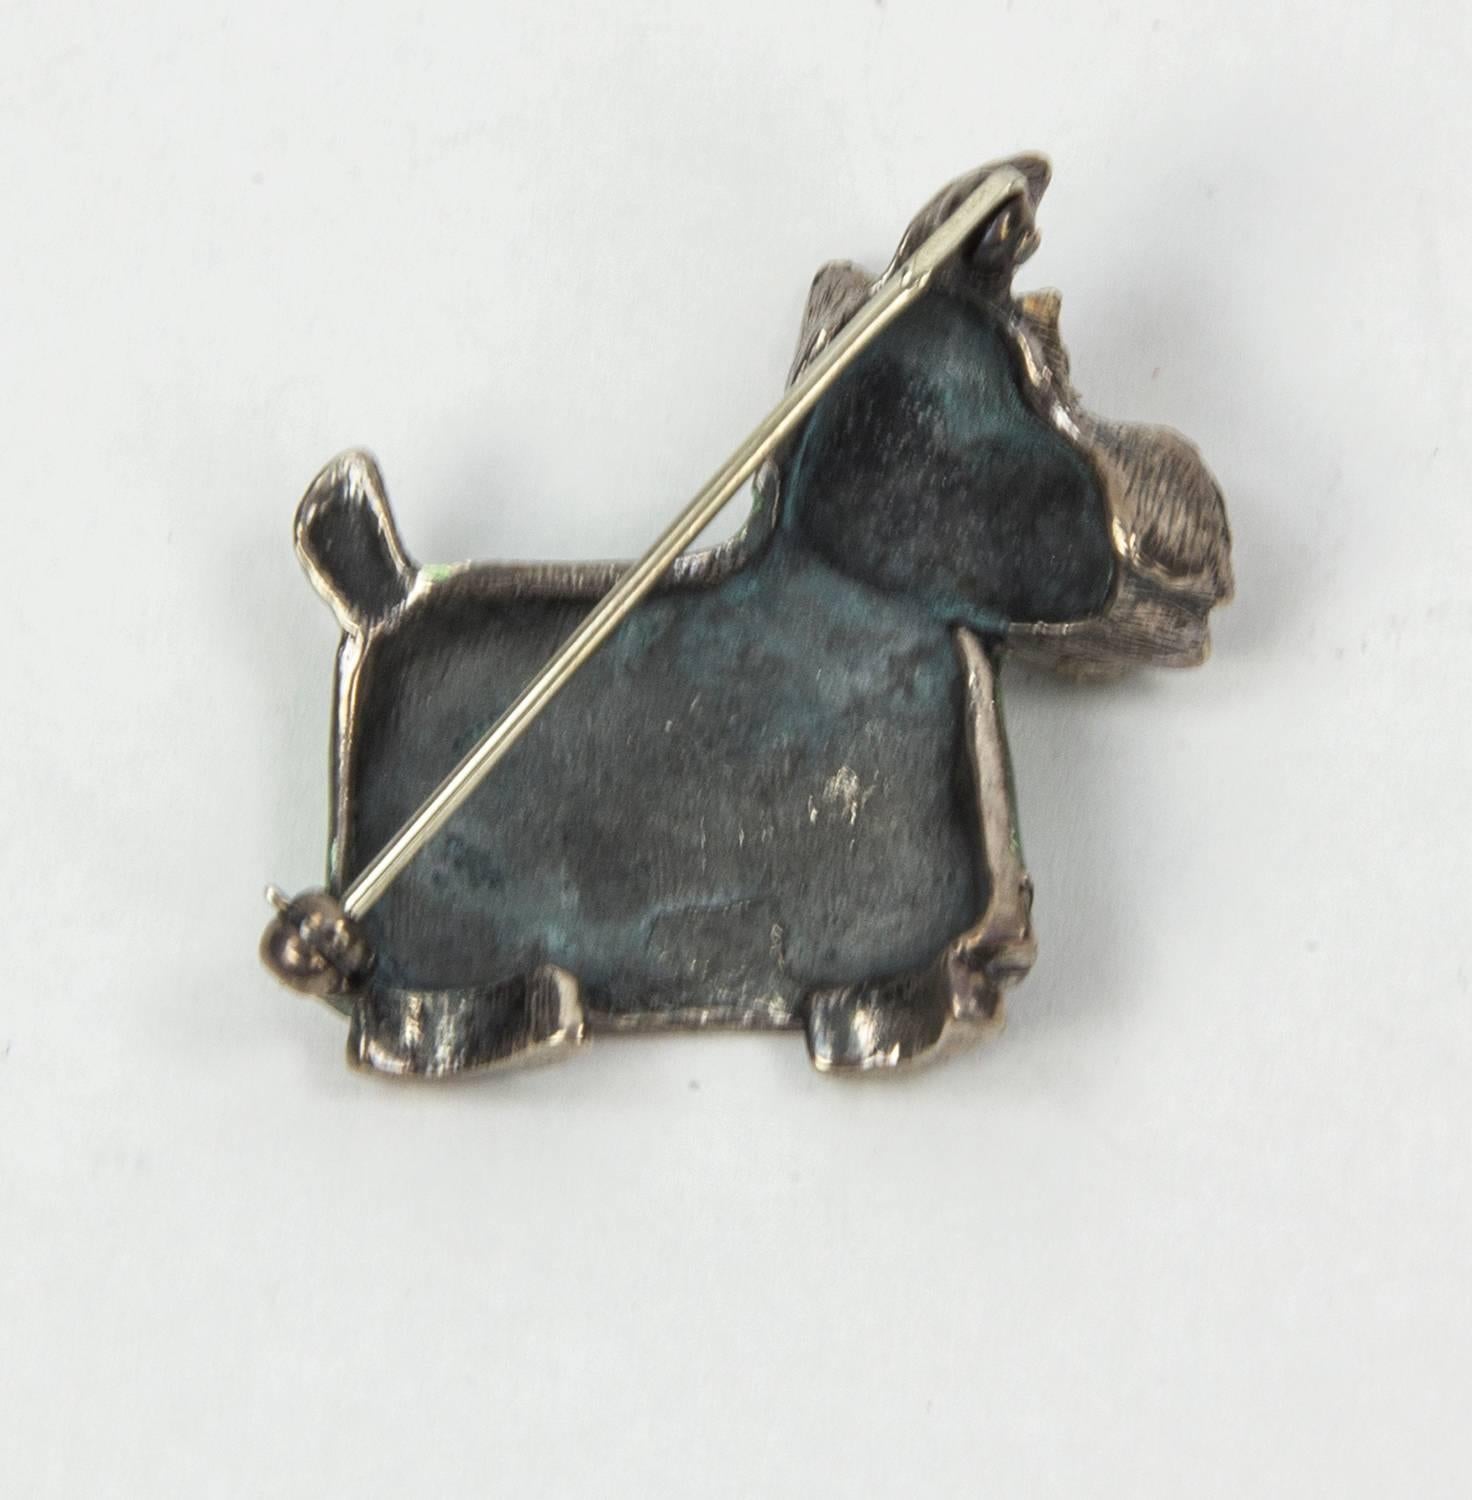 Adorable Scottish terrier in Sterling Silver, sporting a Beautiful green enamel coat; measures approx. 1.25” x 1.25”. The go-to accessory, offering Timeless appeal and will be a cherished addition to your collection! 
